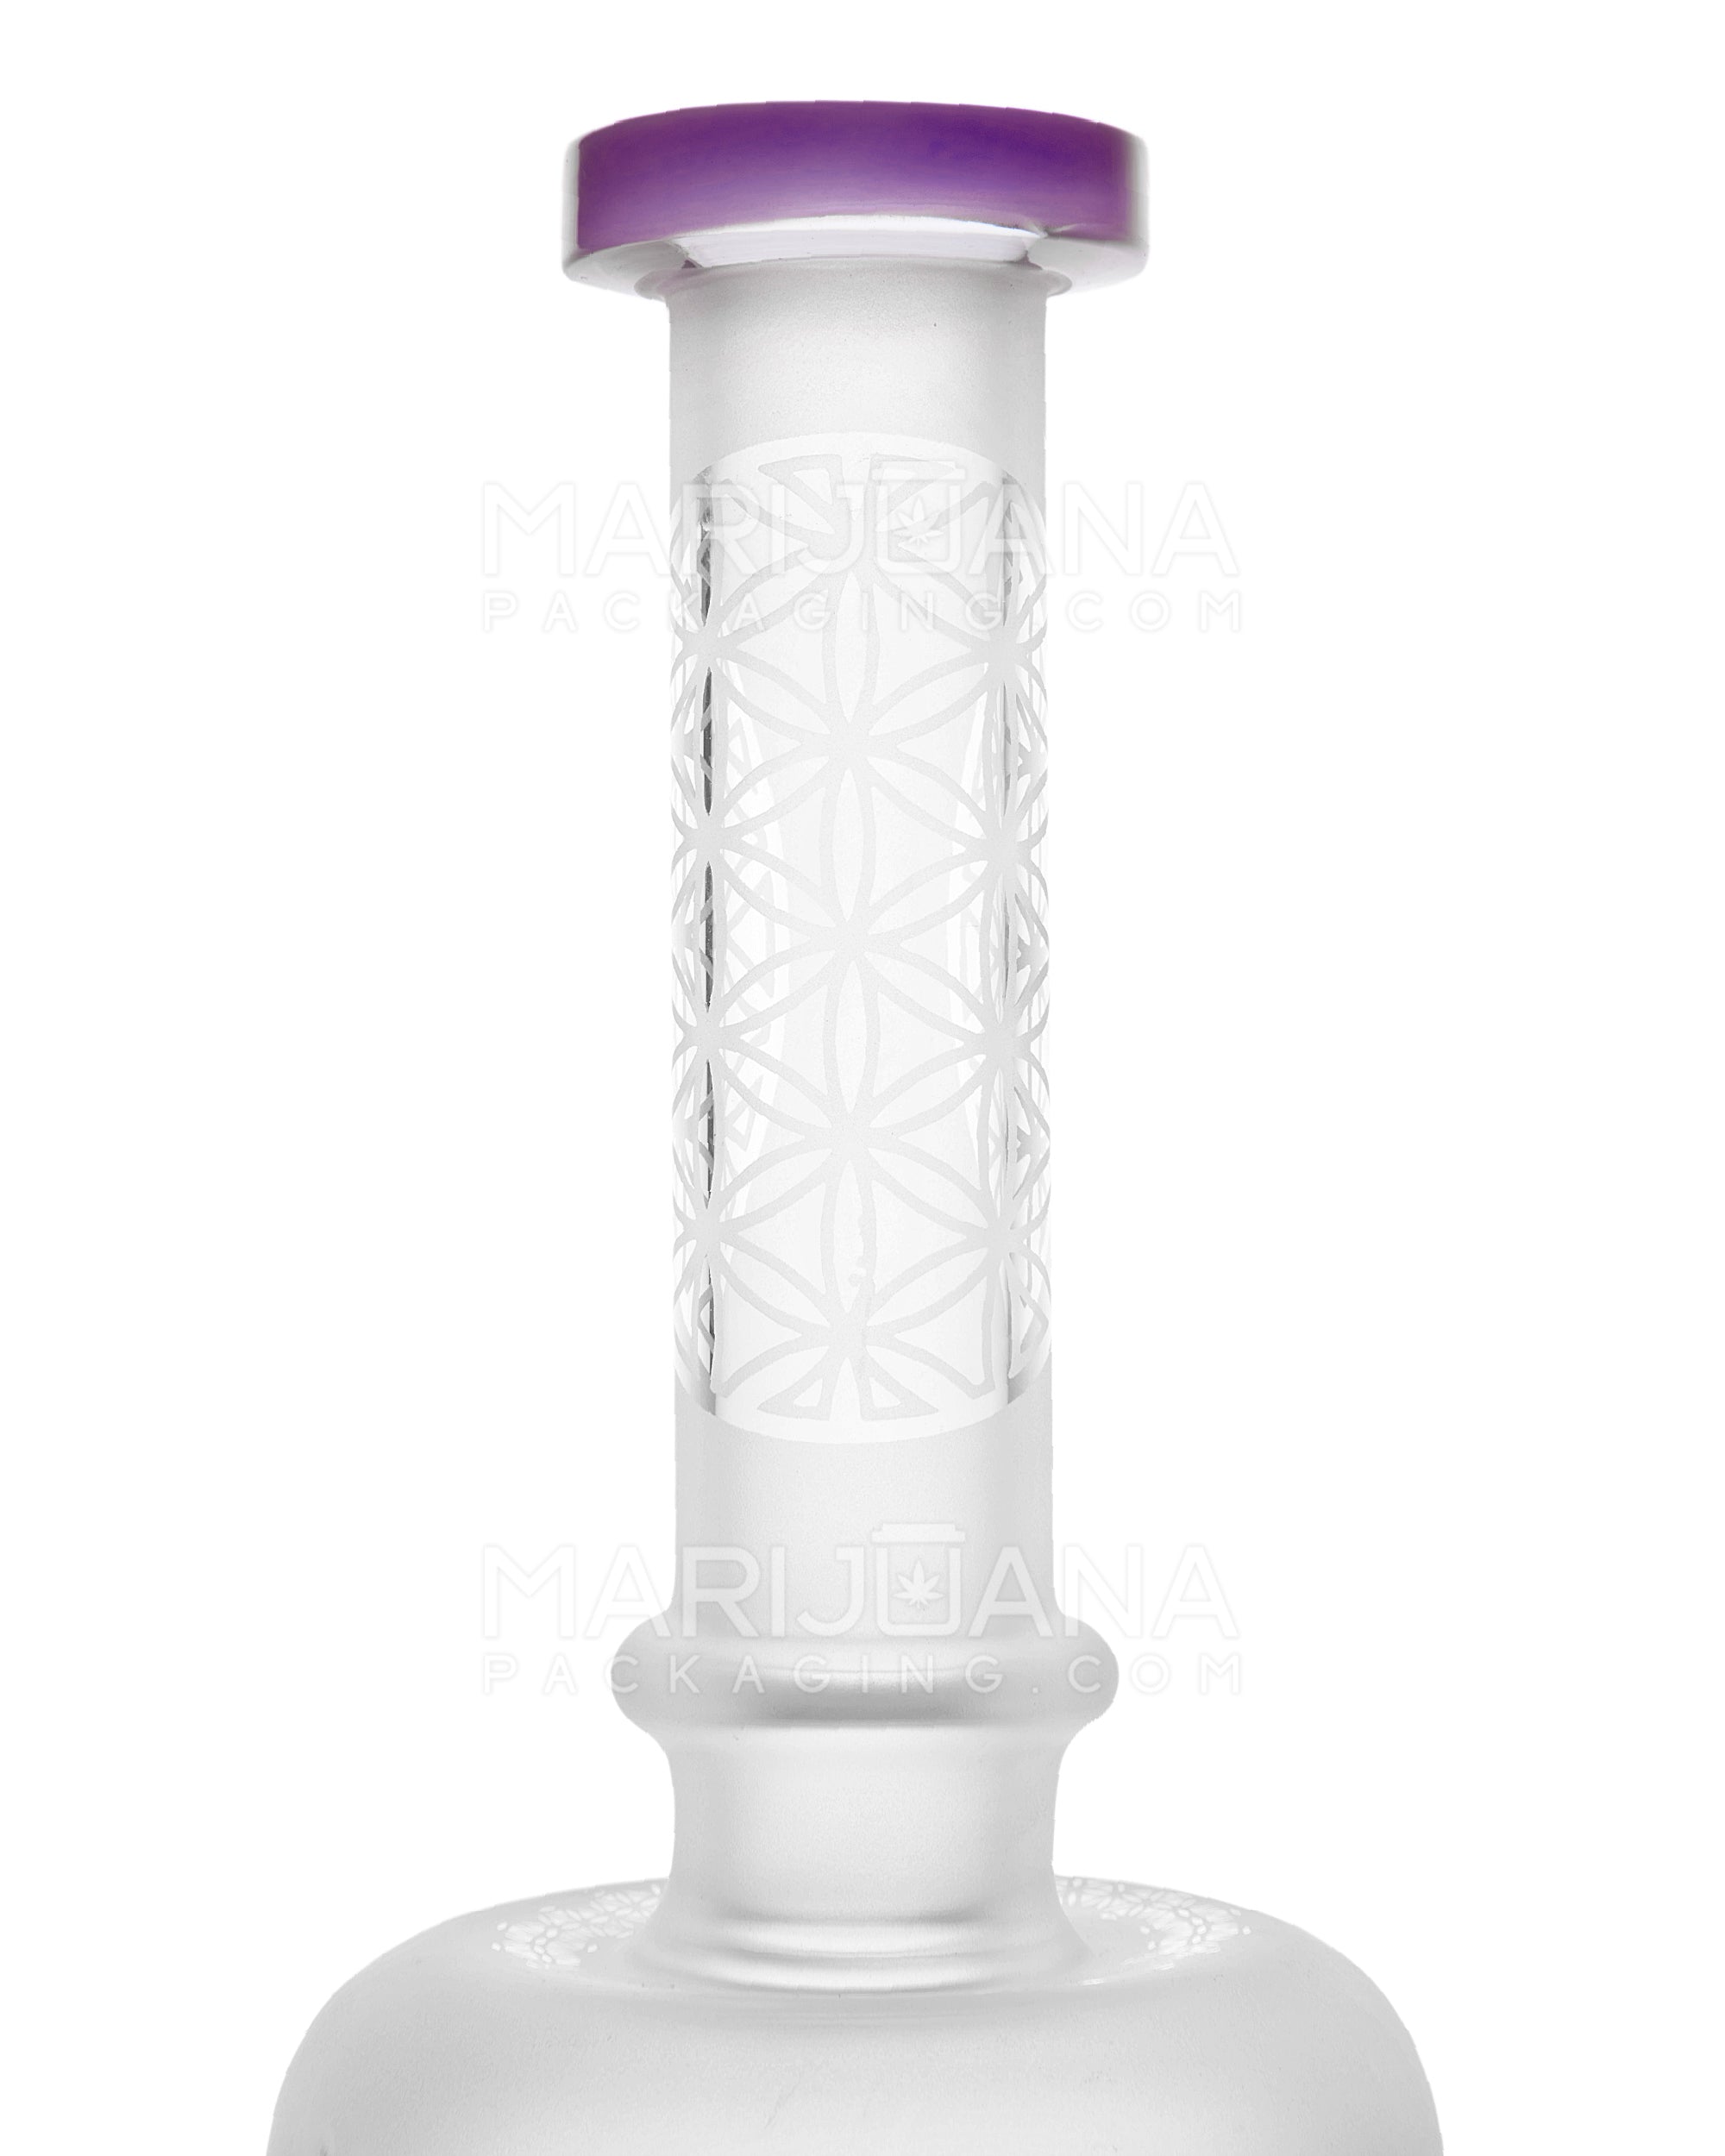 USA Glass | Straight Neck Matrix Perc Sandblasted Glass Water Pipe w/ Implosion Marbles | 11in Tall - 14mm Bowl - Purple - 4